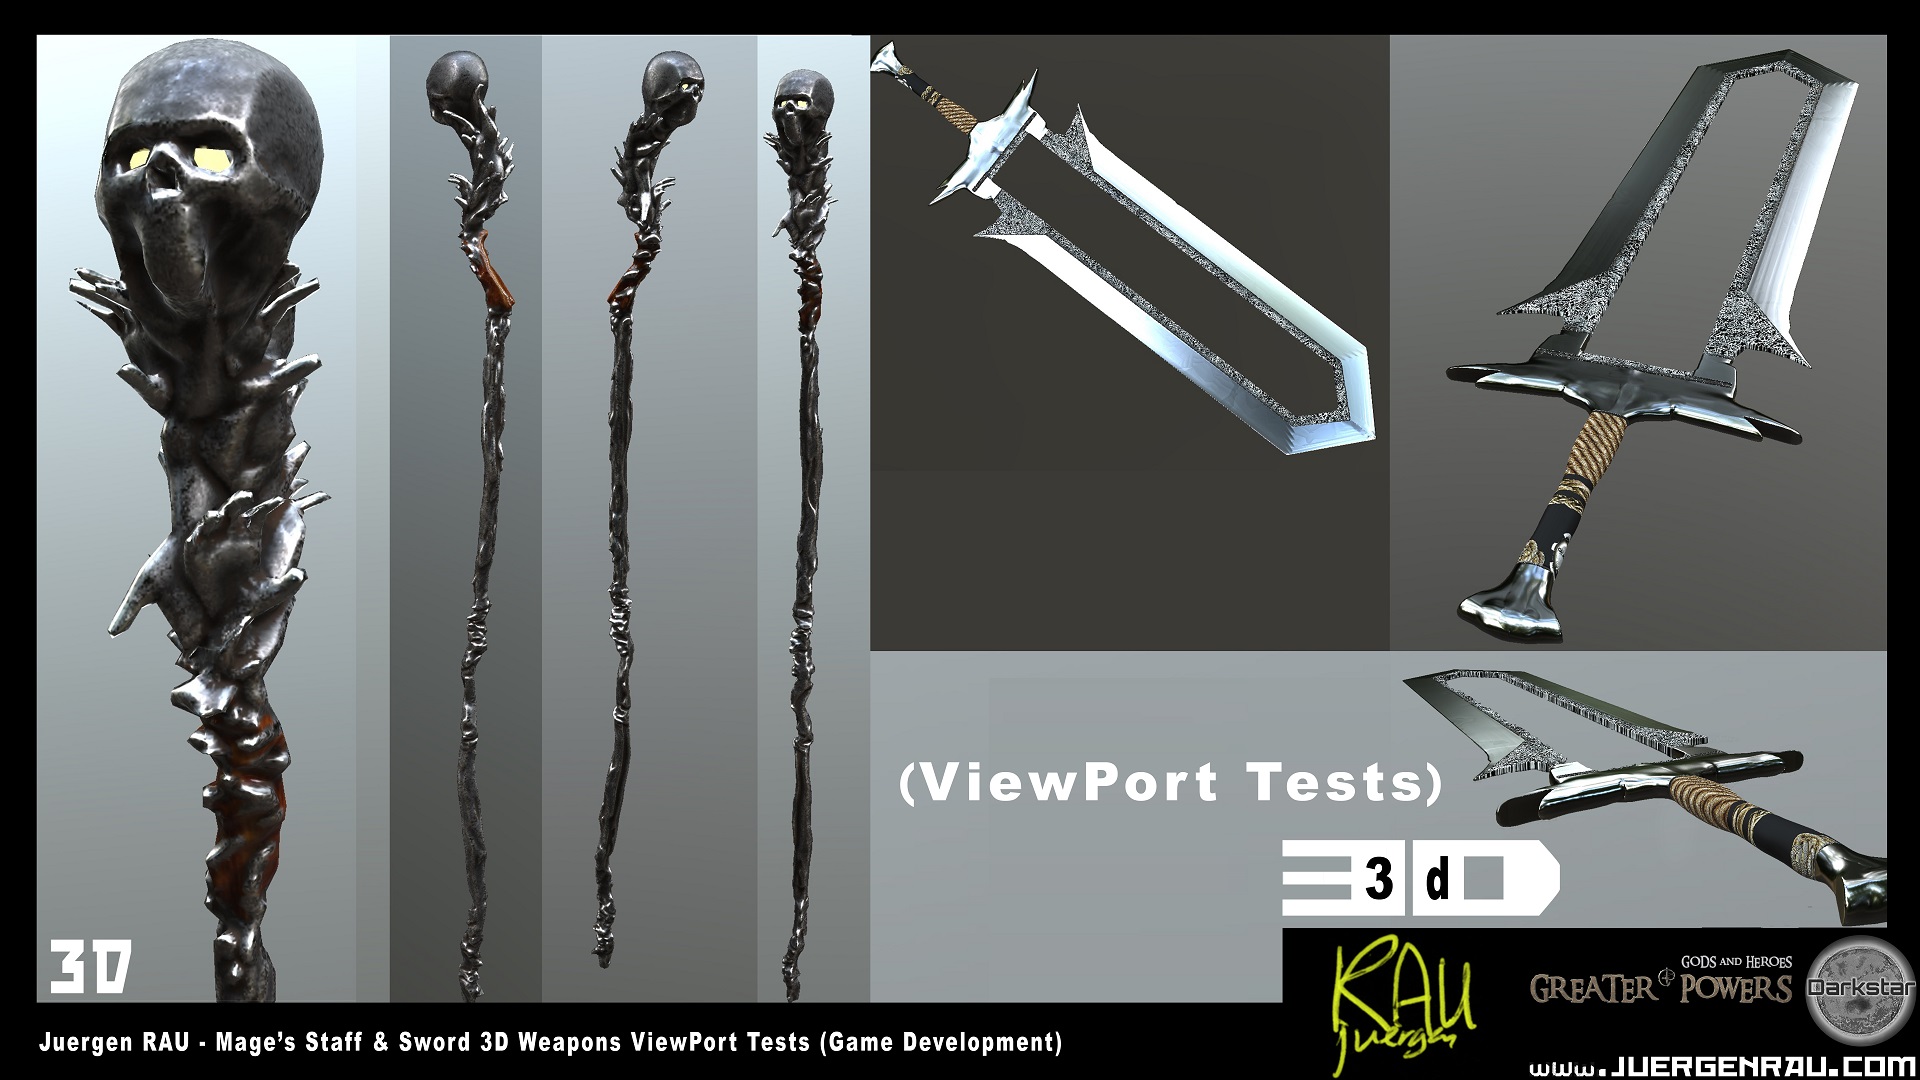 
Weapons Sword Mage Staff Models ViewPort Tests
